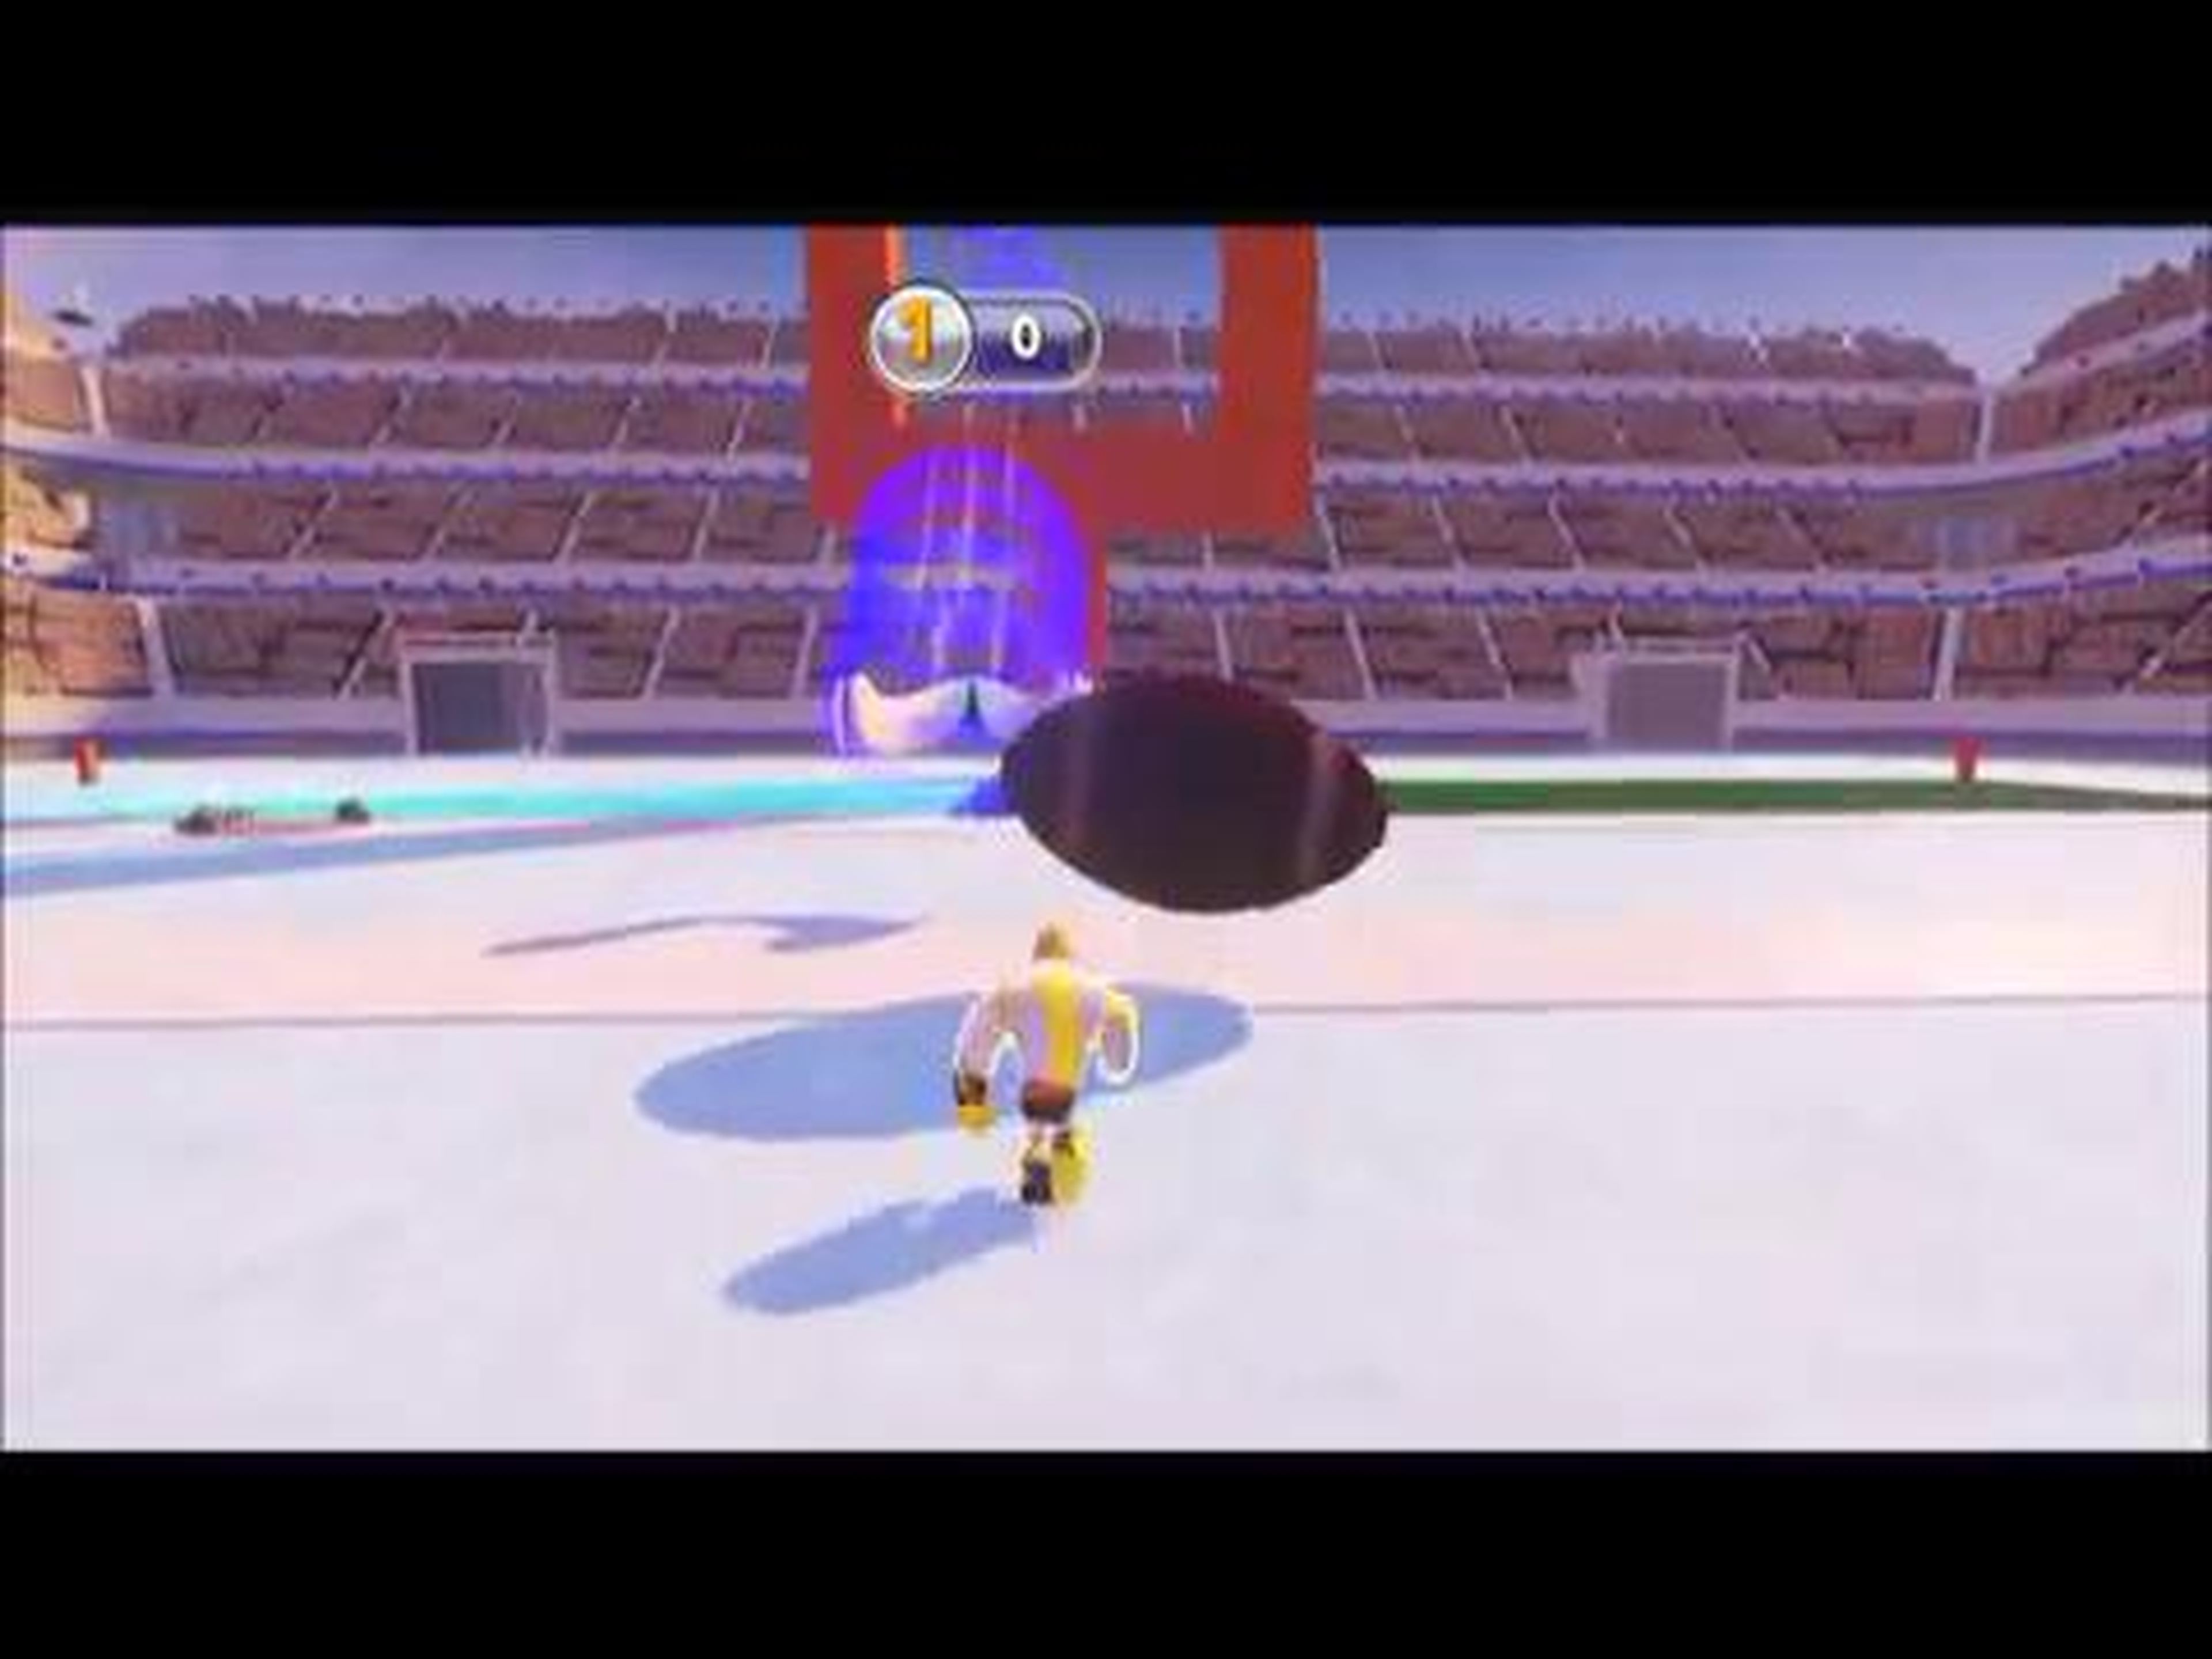 DISNEY INFINITY- The Big Game (Downloadable Toy Box)